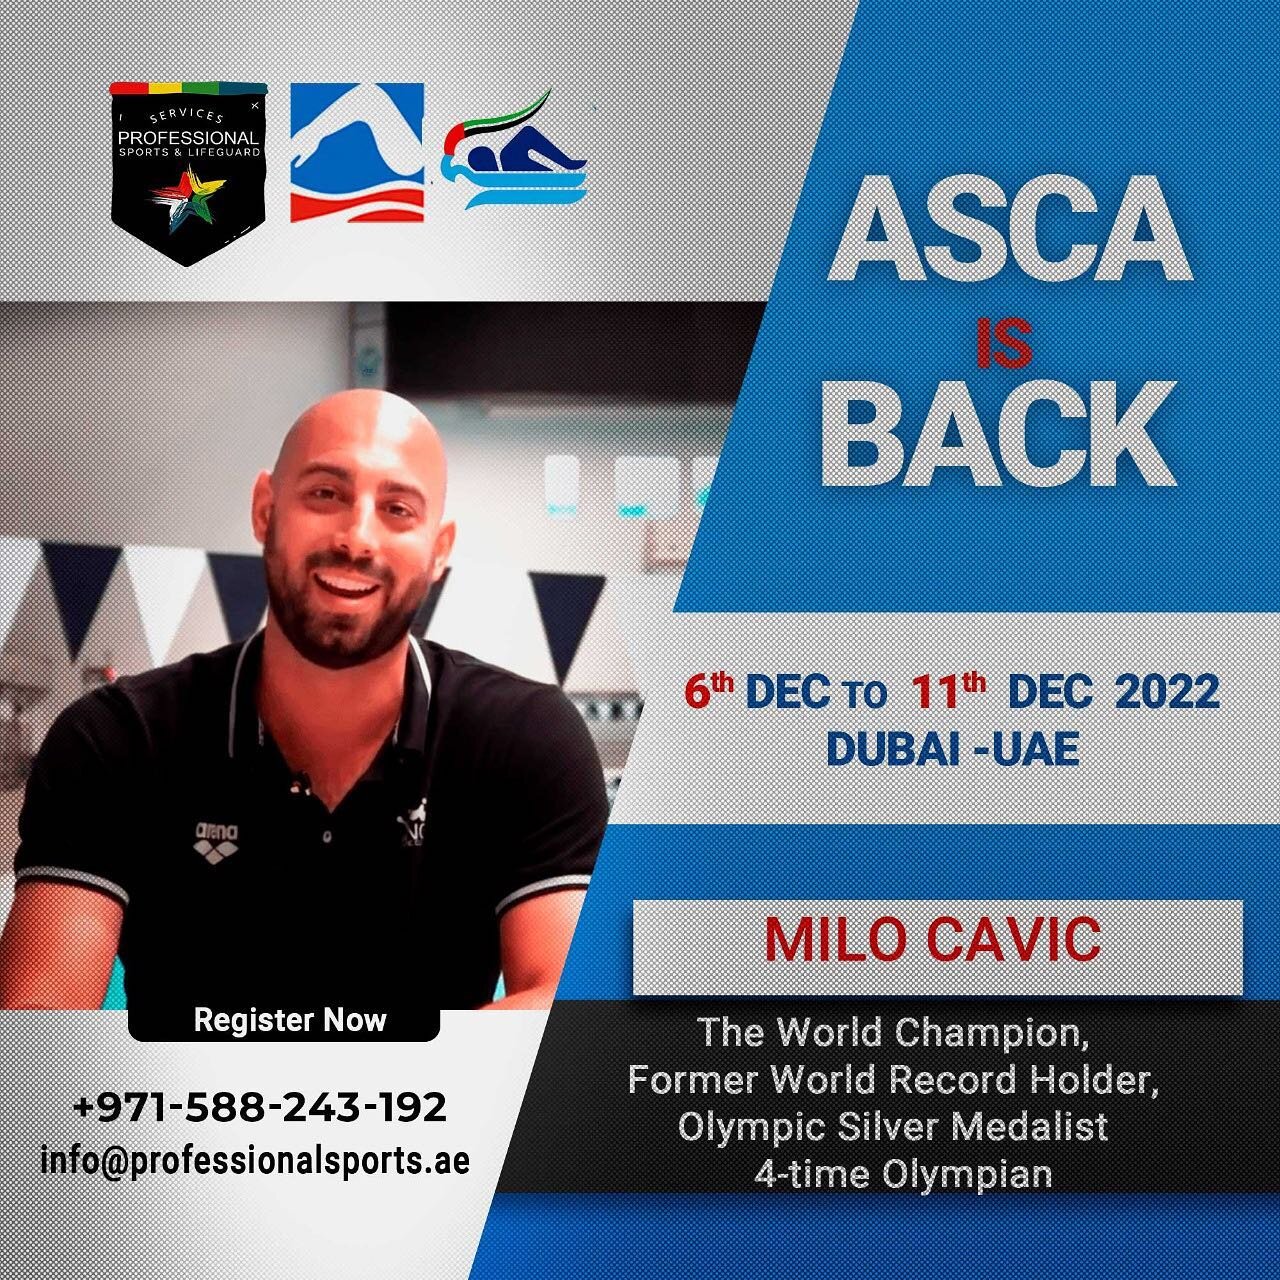 I'm back! I look forward to presenting for @ascaswimming, again! Teaching teachers and coaches is a lot of fun! @professional_sports_lifeguard